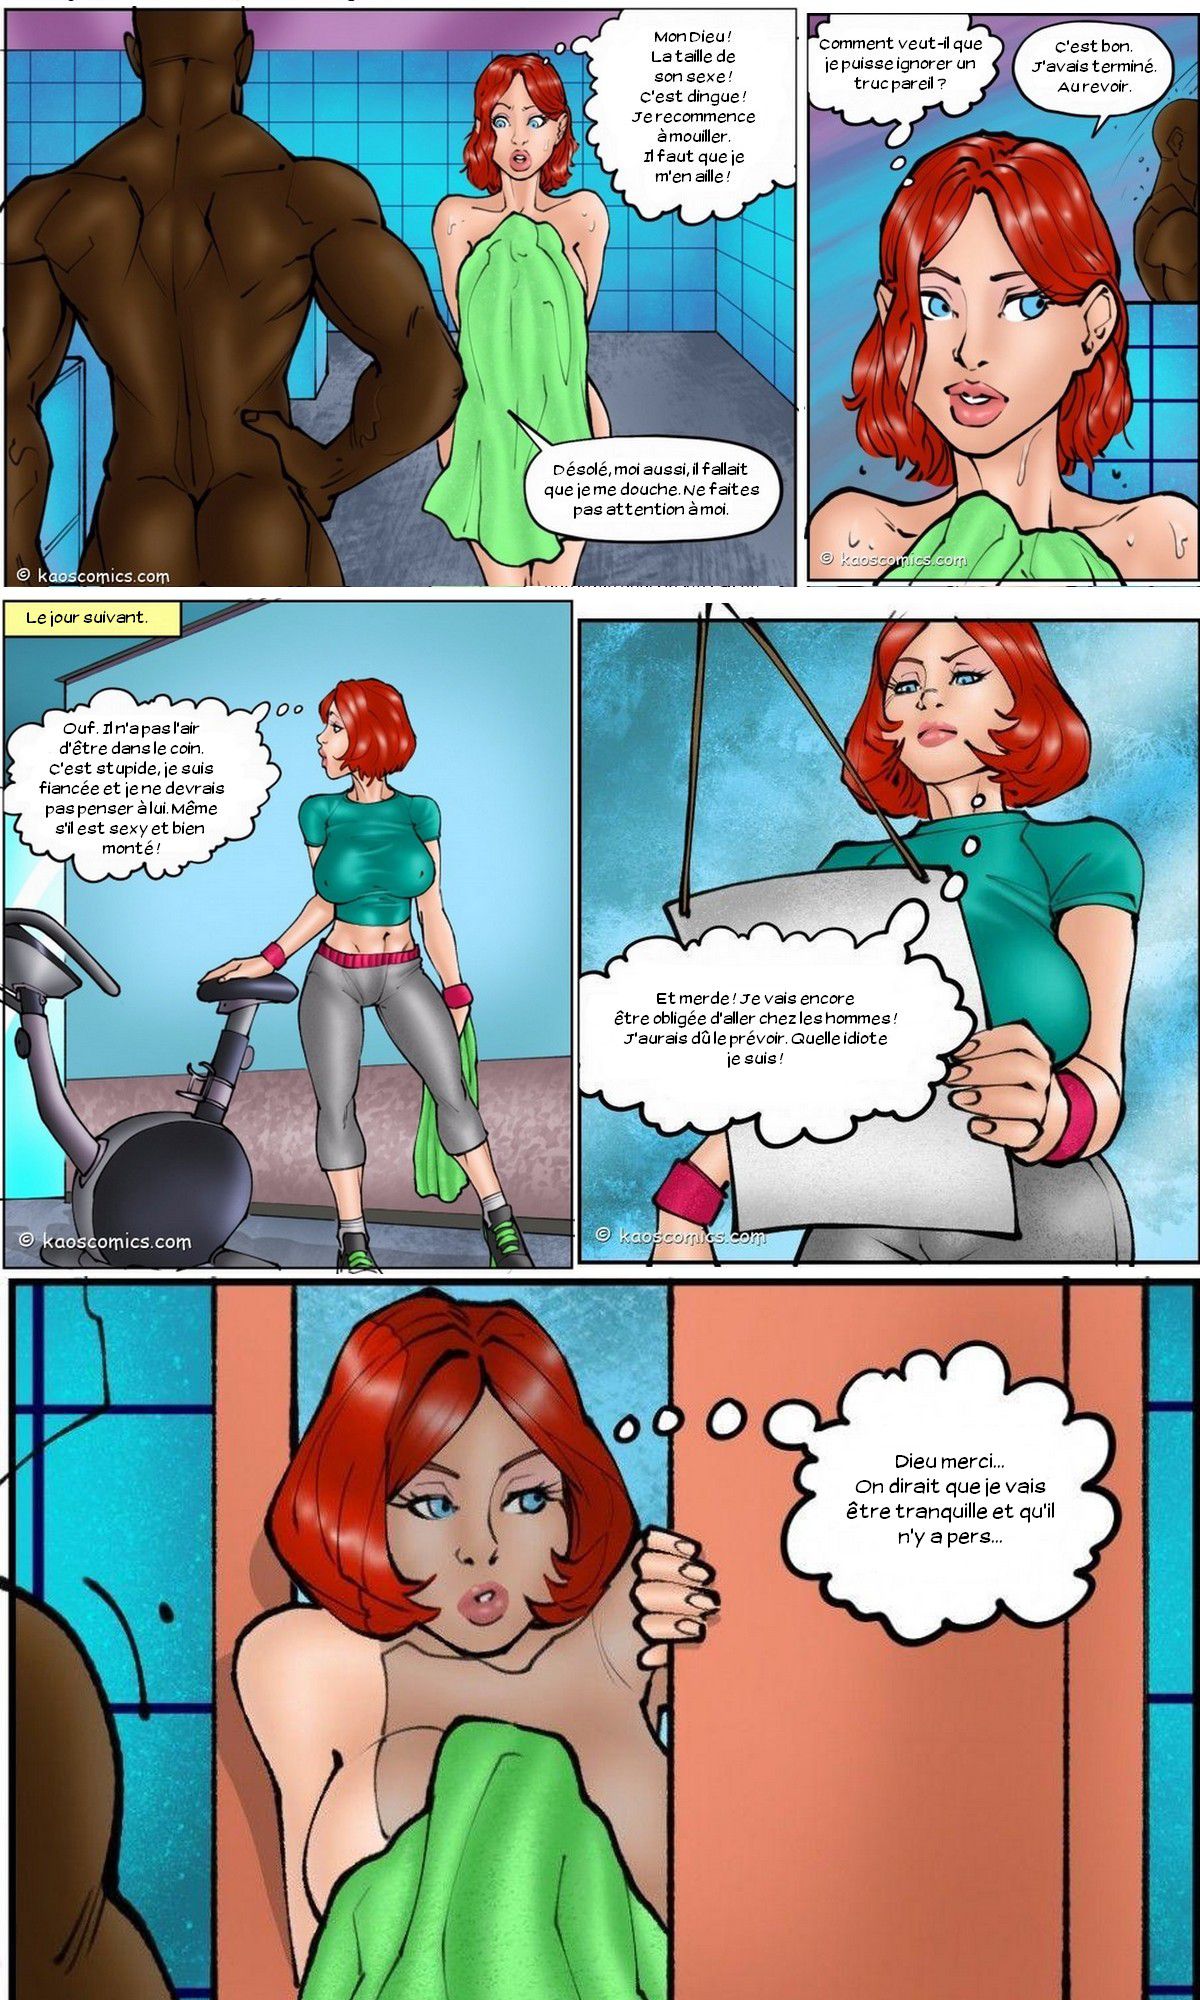 [Kaos] Annabelle's new life #1 [French][Zer0] 7